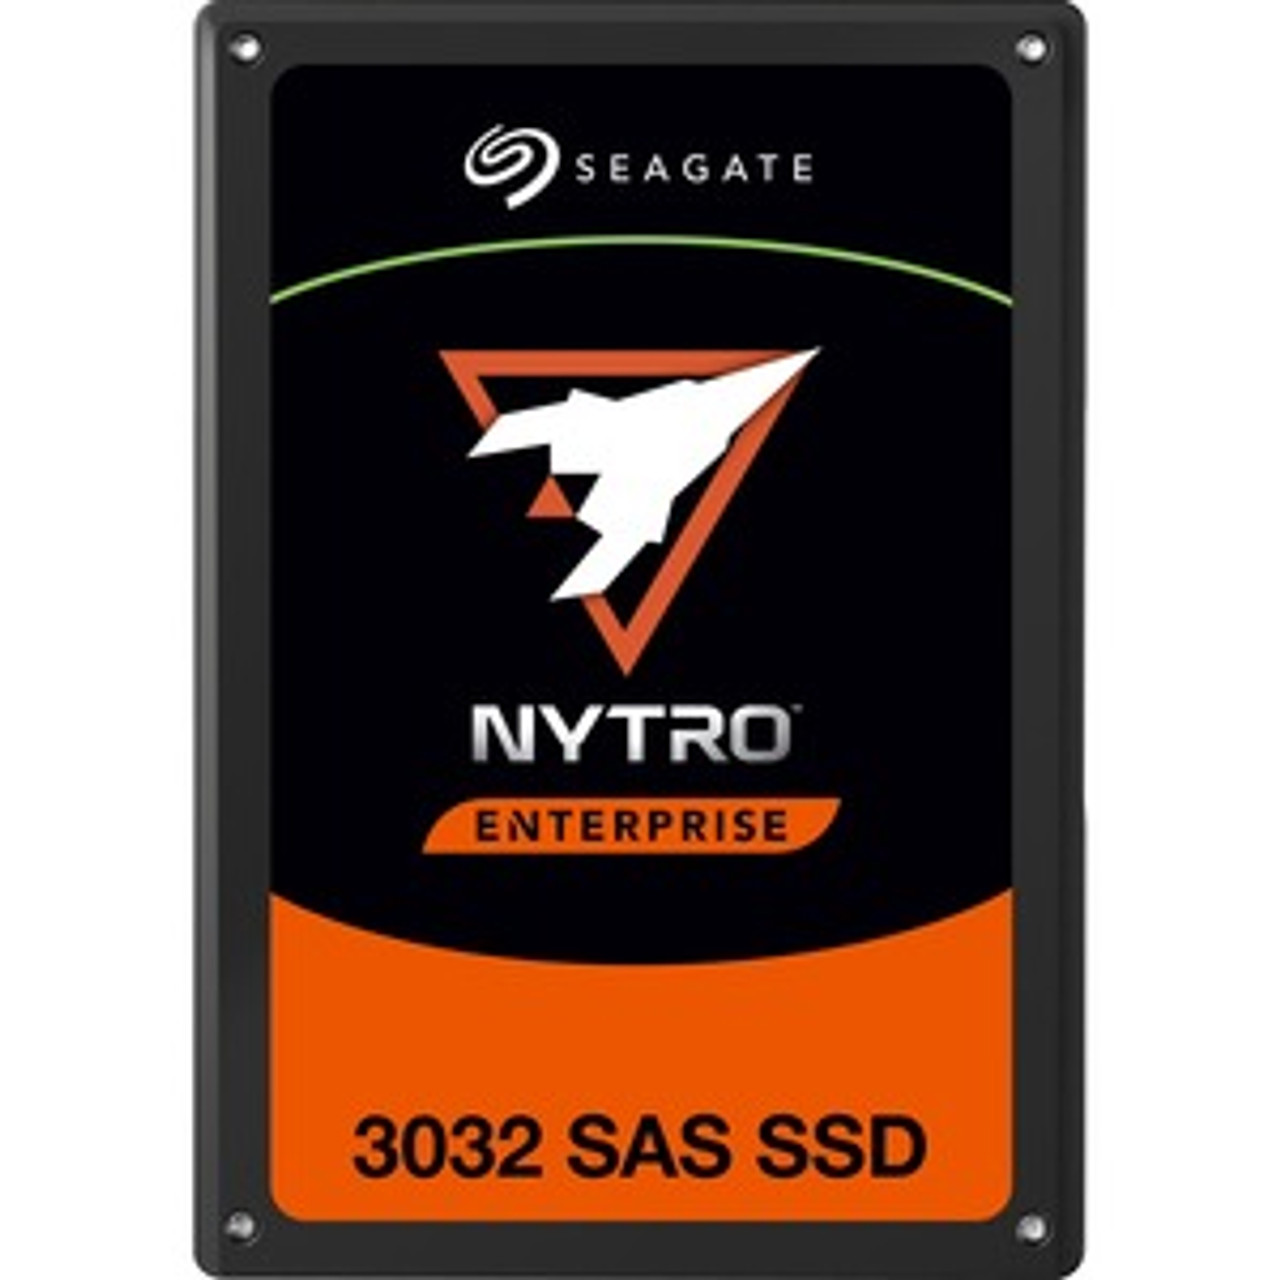 XS960SE70094-10PK Seagate Nytro 3032 Series 960GB eTLC SAS 12Gbps Scaled Endurance 2.5-inch Internal Solid State Drive (SSD) (10-Pack)